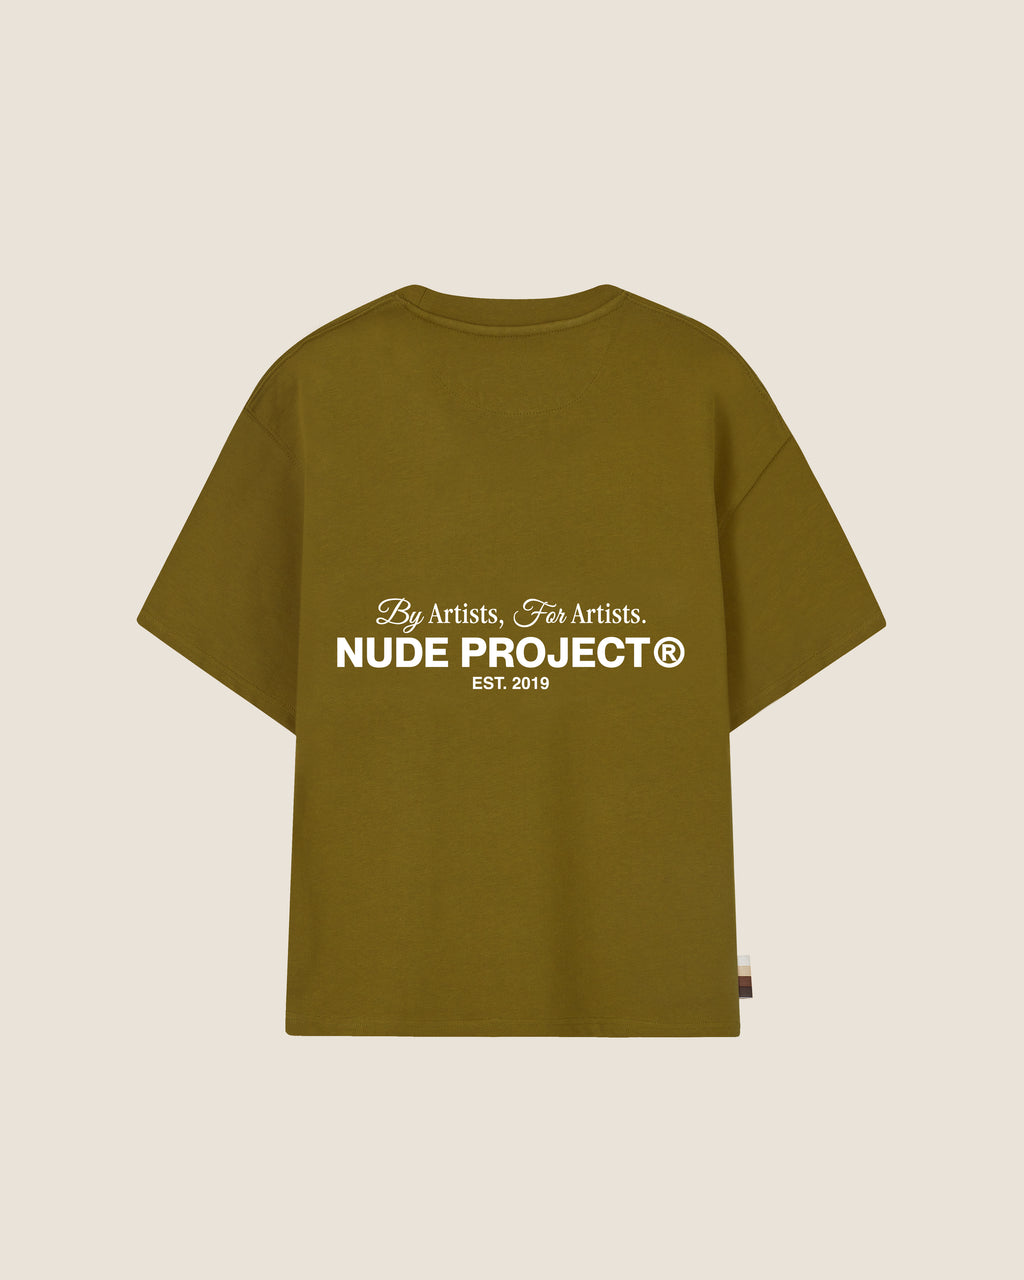 NUDE PROJECT  By artists, for artists.